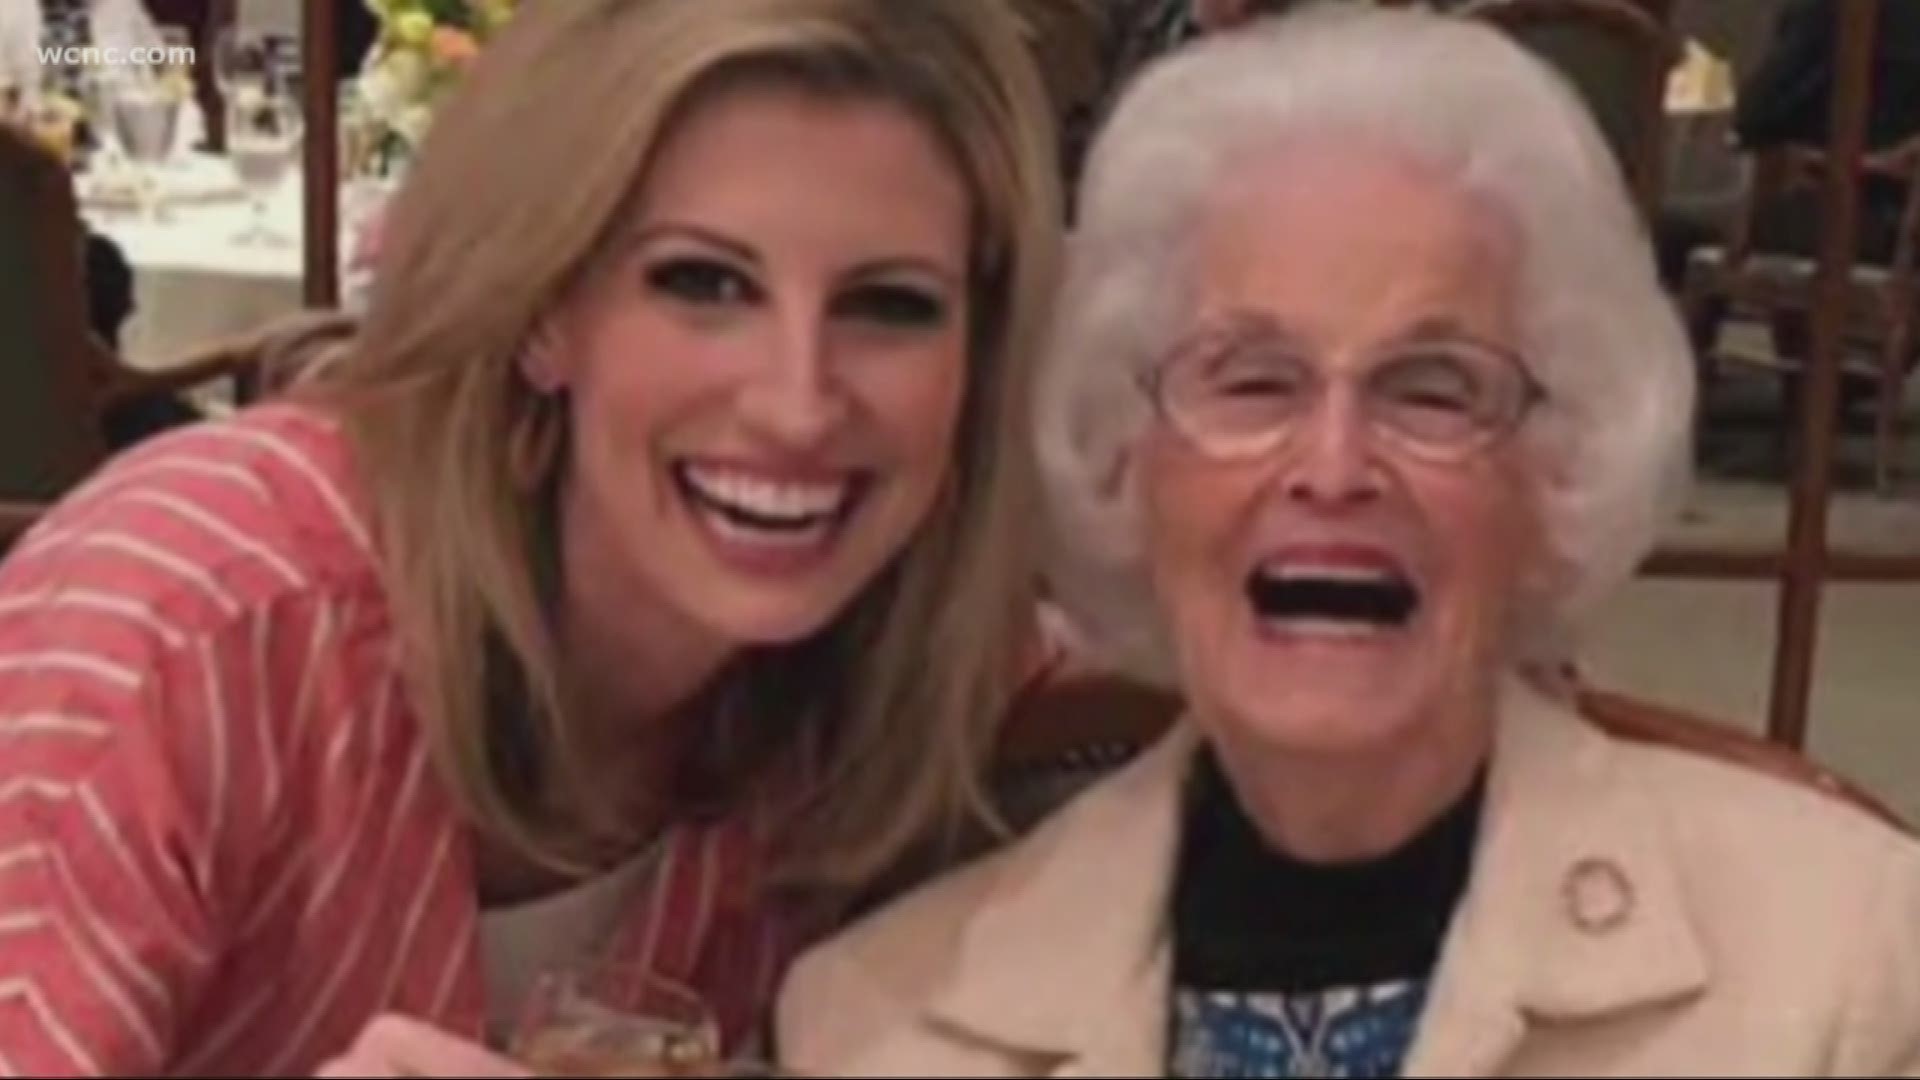 WCNC evening anchor Sarah French decided to call up her 101-year-old grandmother to get her take on Women's Equality Day.